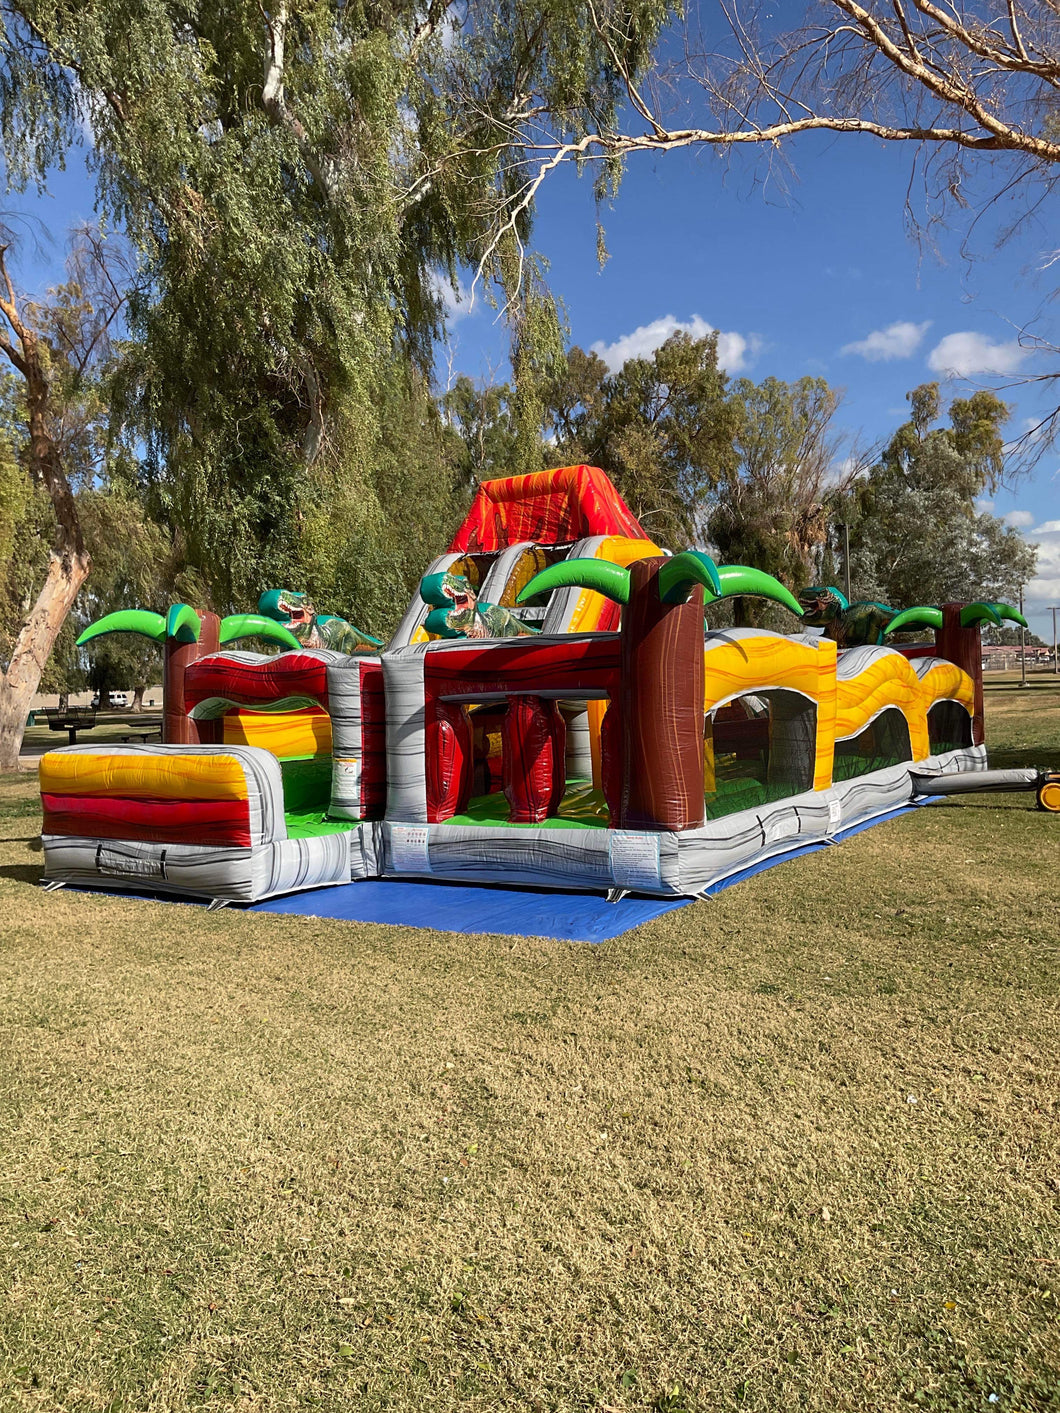 80' Jurassic Wrap Around Dual Lane Obstacle course with Waterslide Wet/Dry